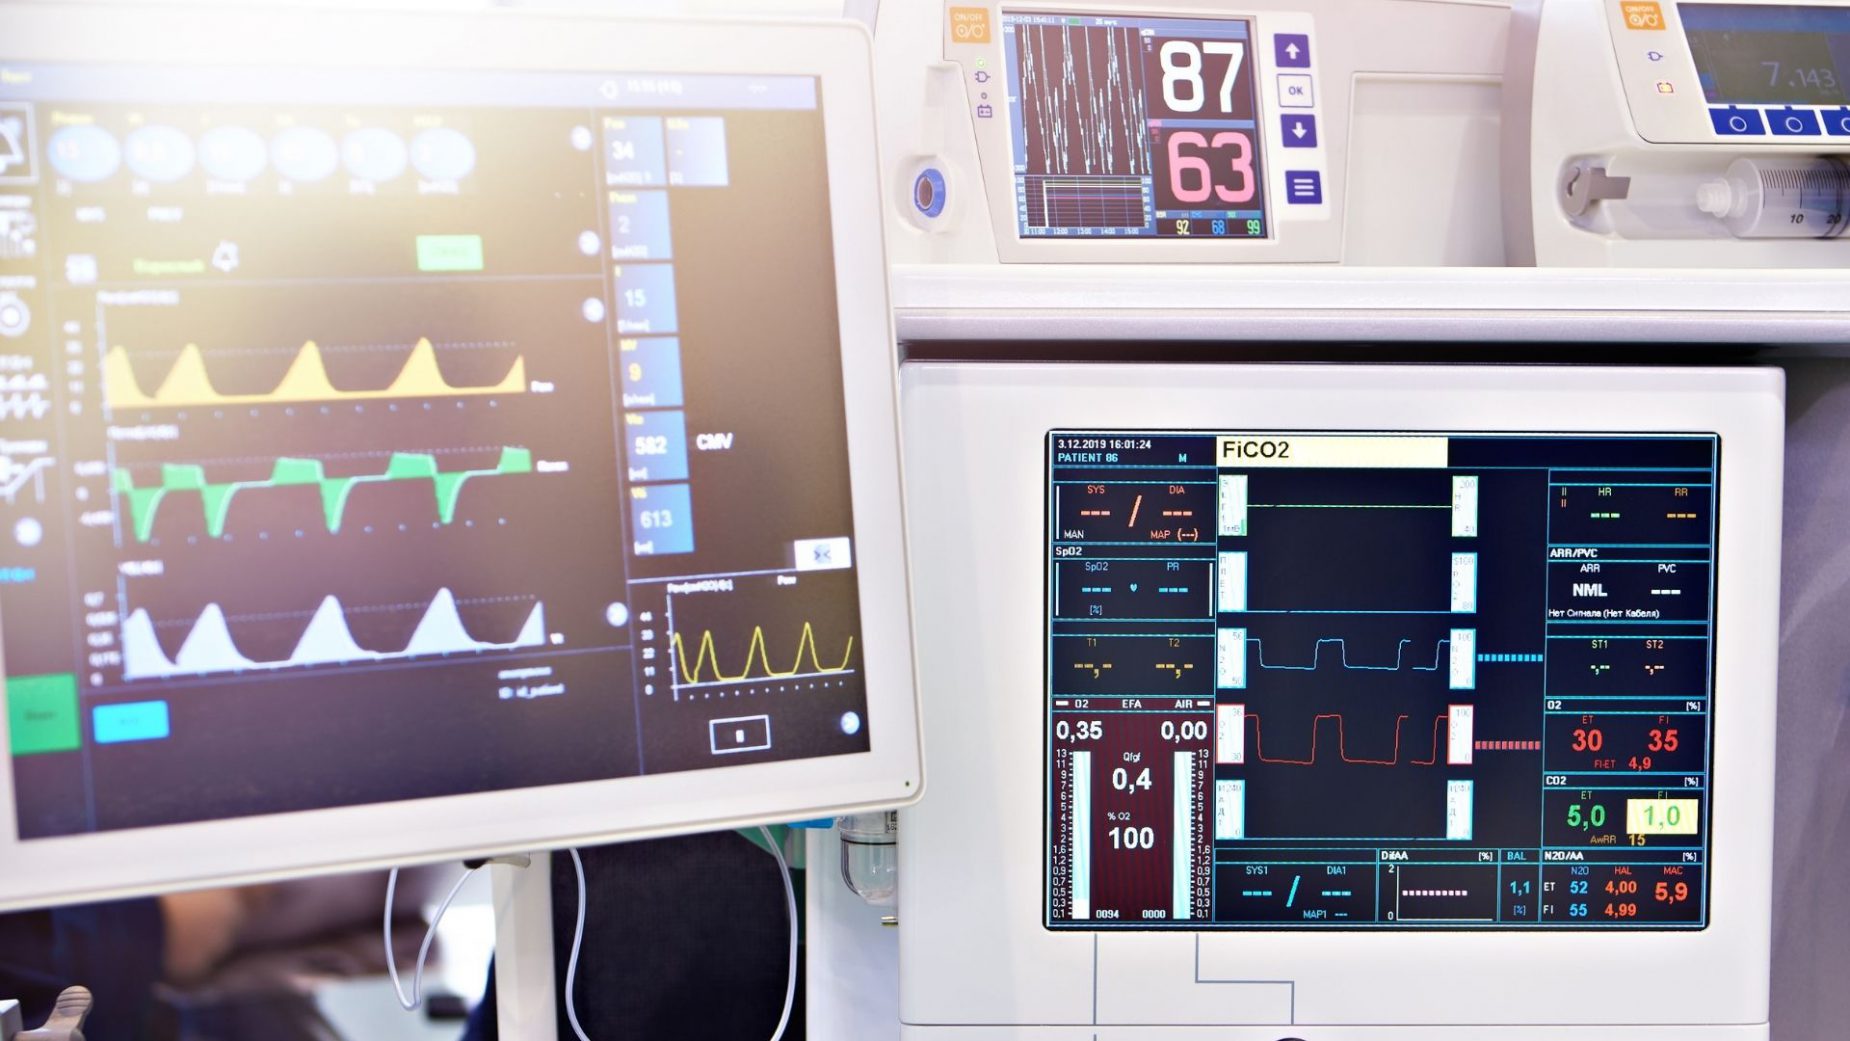 Remote Patient Monitoring Devices And Equipment Market